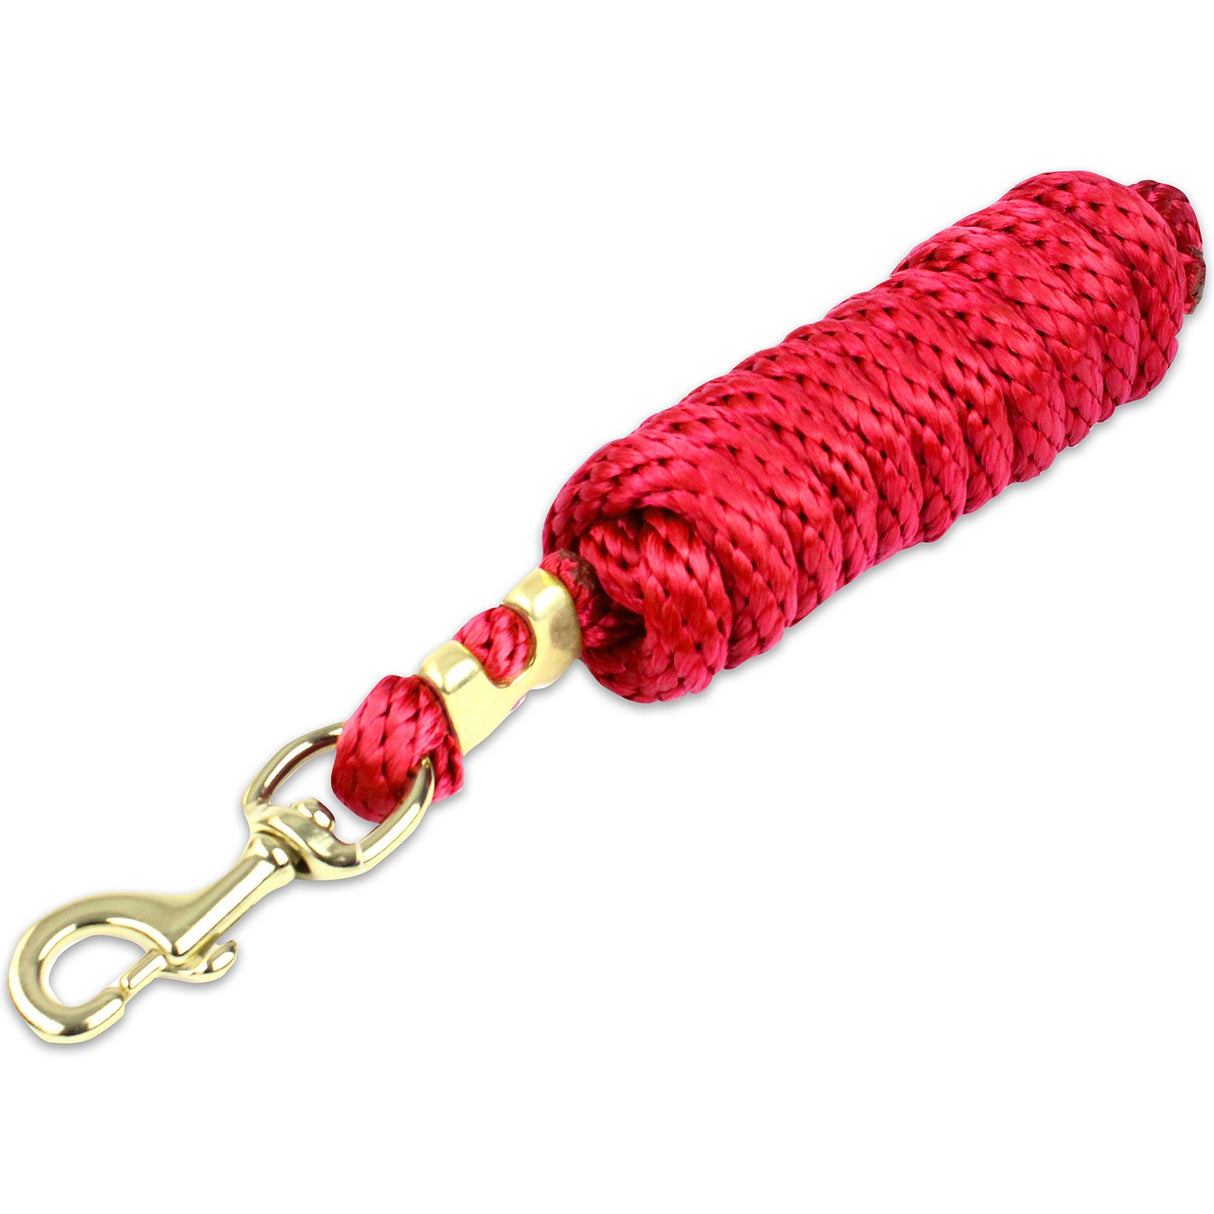 KM Elite 10ft Lead Rope #colour_red